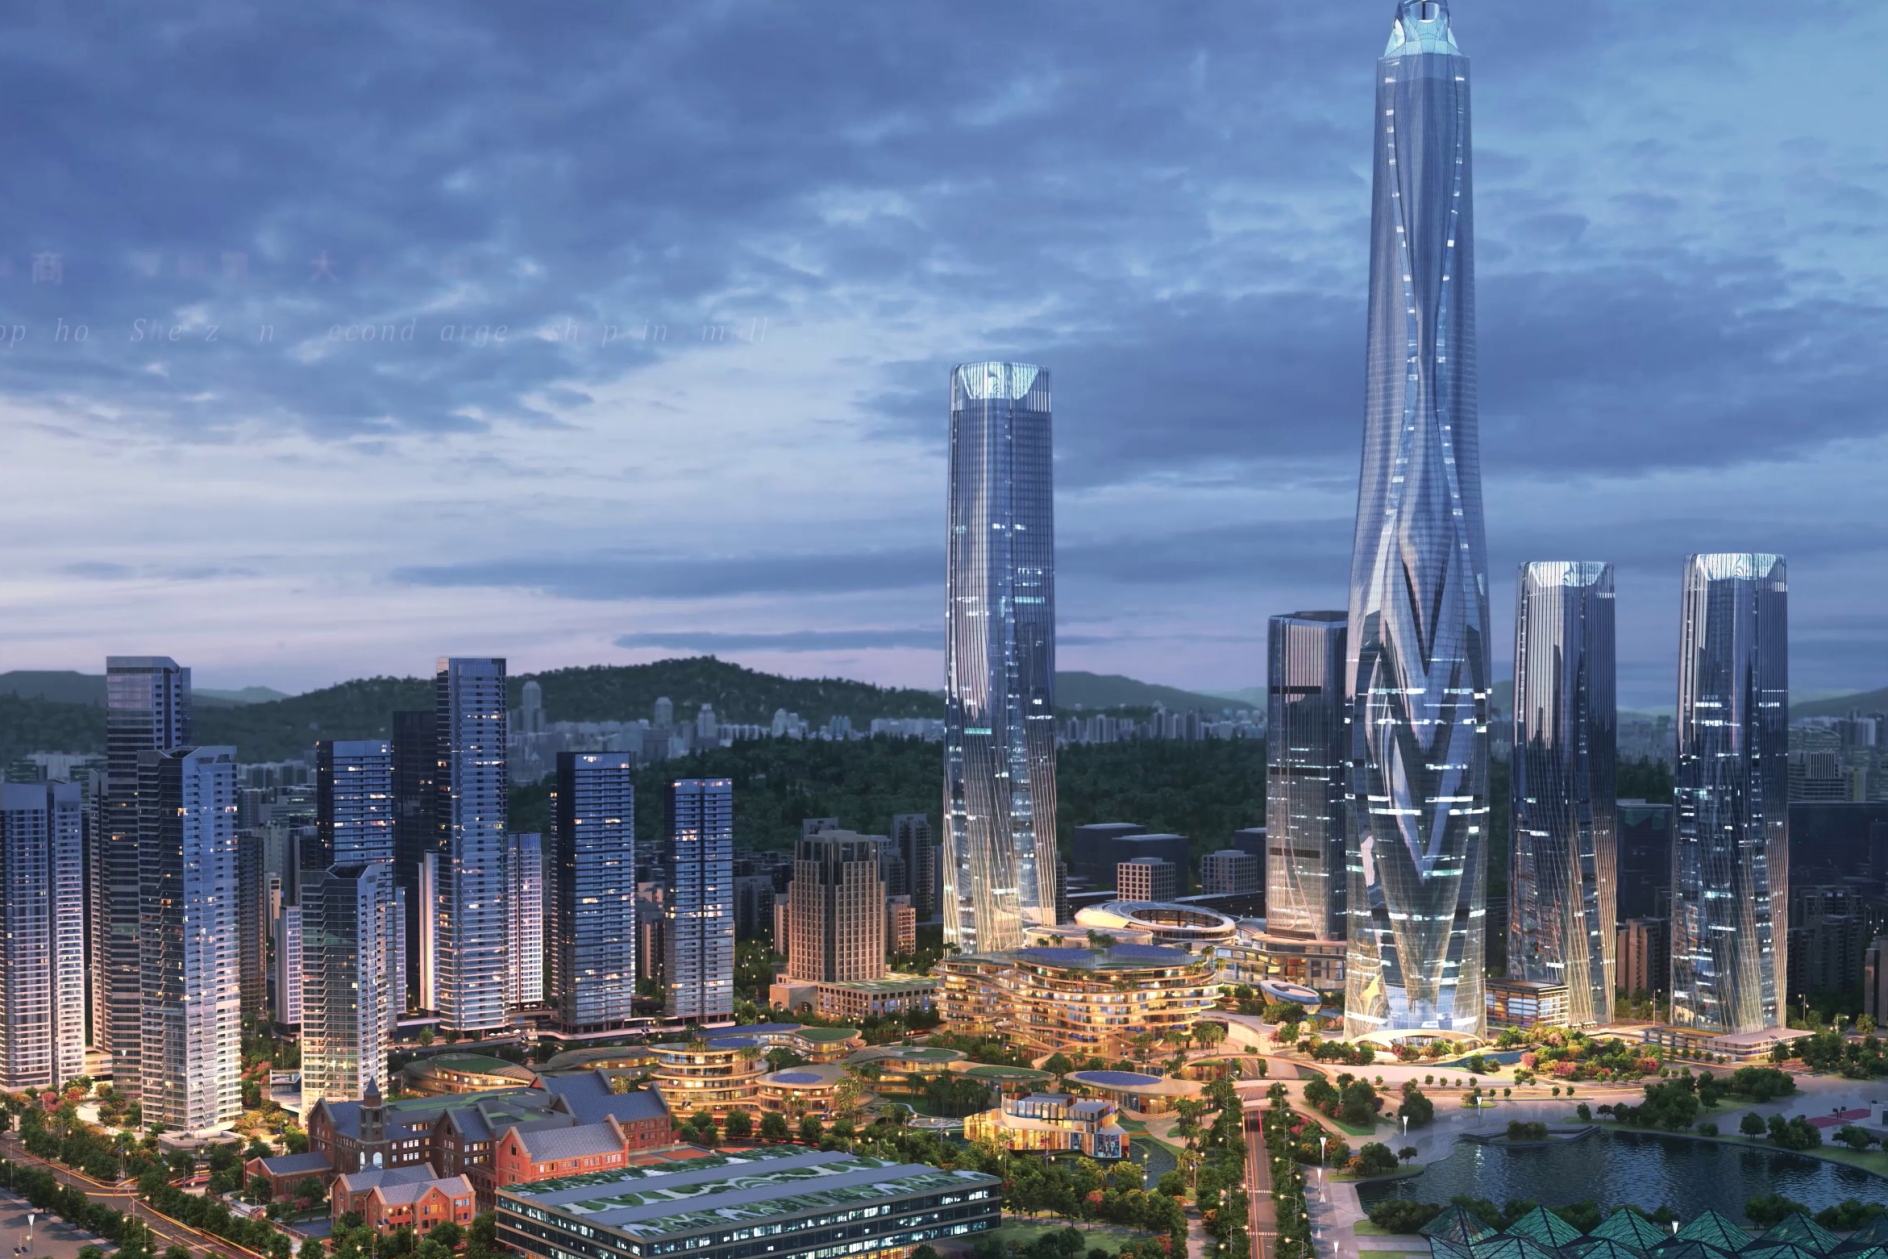 As Hilton’s first Waldorf Astoria hotel in Shenzhen, the hotel will be located in the newly developed CBD and in close proximity to Shenzhen Hong Kong International Centre. Easily accessed through one of the city’s three international airports, guests can arrive at the hotel within an hour by car. In the near future, the approved masterplan of the Shenzhen railway network will increase the accessibility from the hotel to downtown Shenzhen, Huizhou, Dongguan and Hong Kong. Click to enlarge.